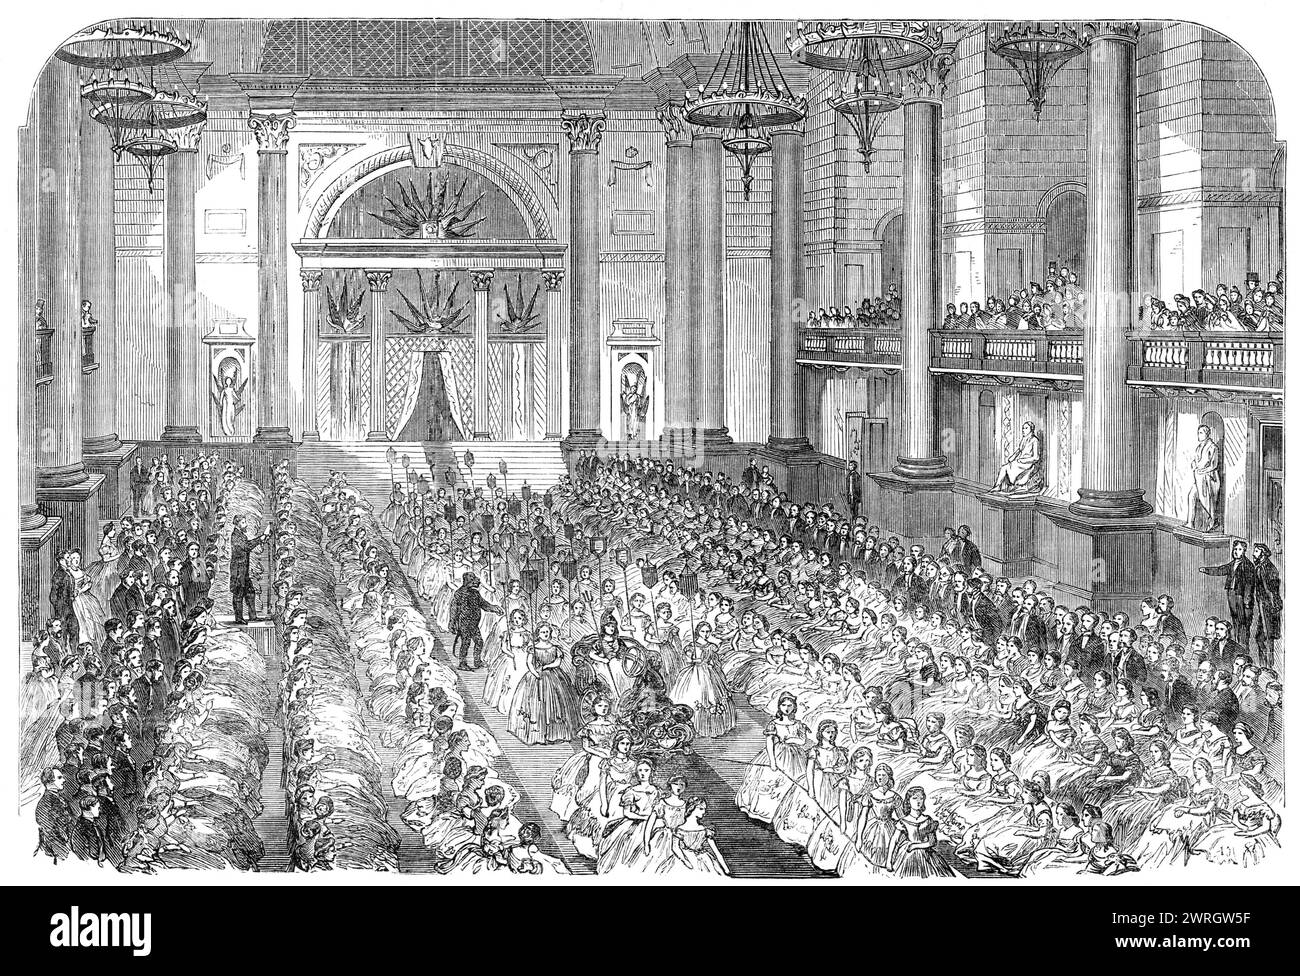 Messrs Cope's Christmas entertainment to their workpeople at St. George's Hall, Liverpool, 1864. 'Mr. J. C. Cowper, the tragedian, recited, with great taste and feeling, Tennyson's ode, &quot;The Death of the Old Year.&quot; This was succeeded by slow organ music, amidst which &quot;the Old Year&quot; reached the dais, where he stood and gazed round for a minute. As a deep-toned gong struck twelve, he turned and, lifting the curtains of the tent, retired as he disclosed the &quot;New Year,&quot; a bright little creature, in a costume resembling that of Britannia. At this moment the light once Stock Photo